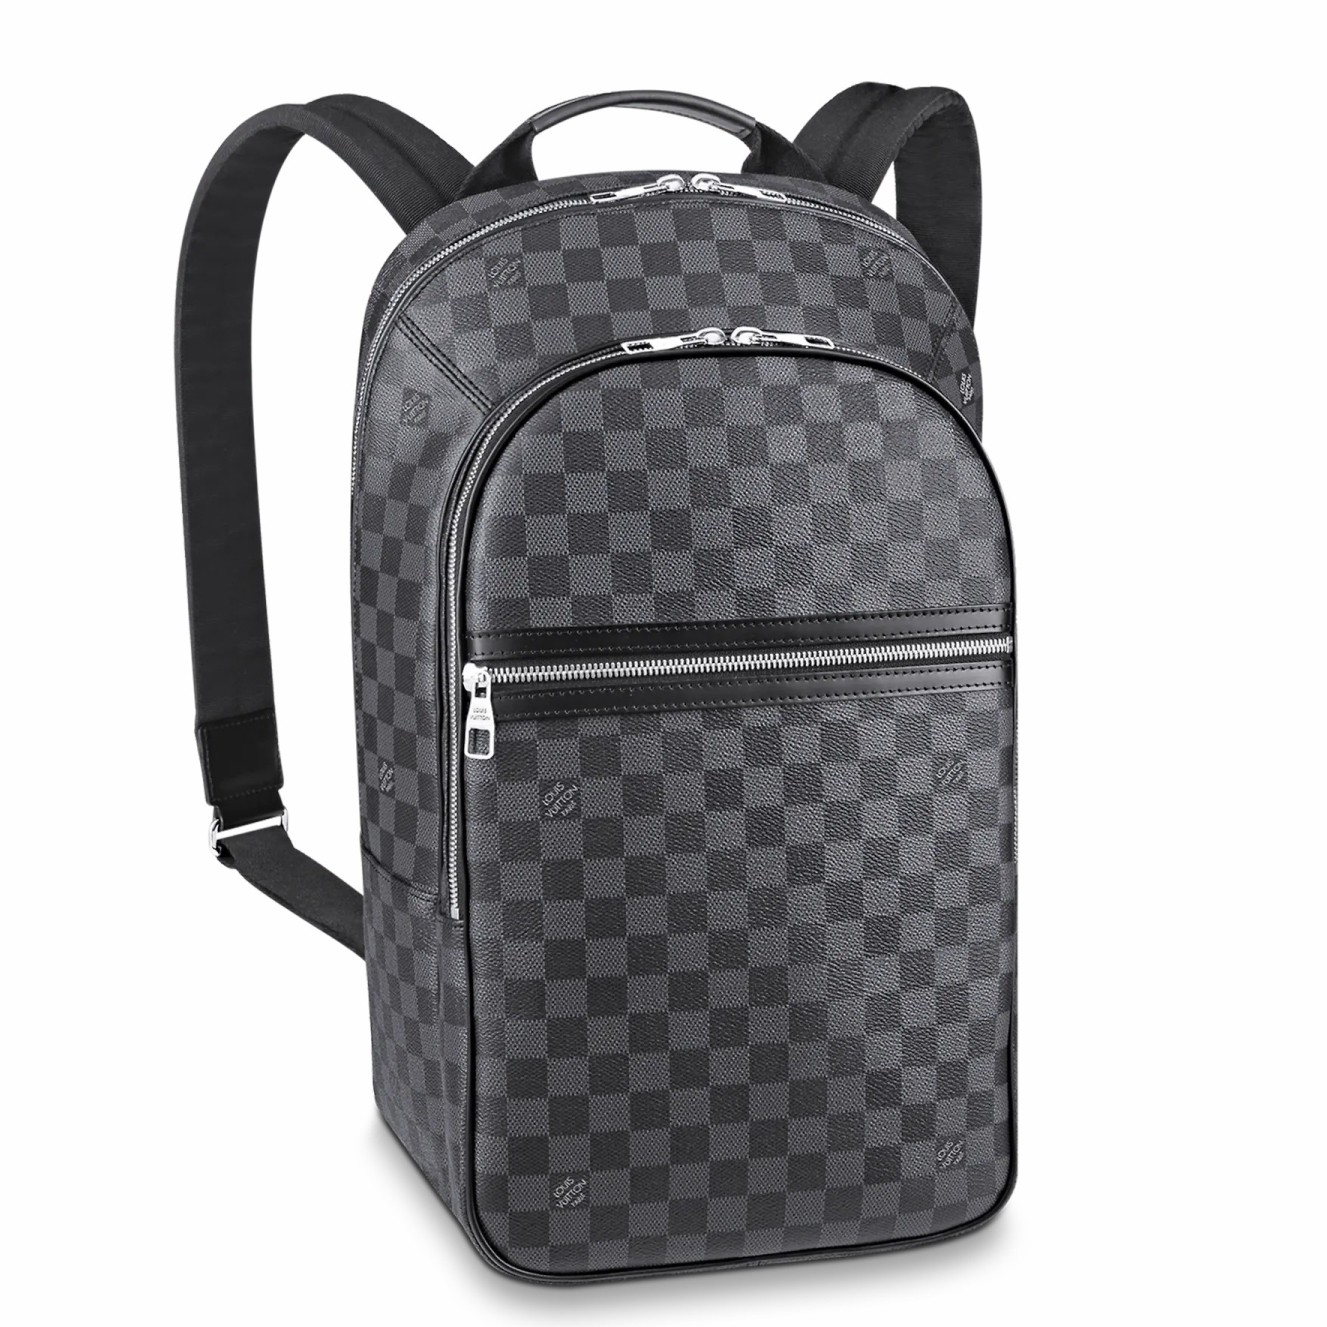 Replica Louis Vuitton Michael Backpack In Damier Graphite Canvas N58024